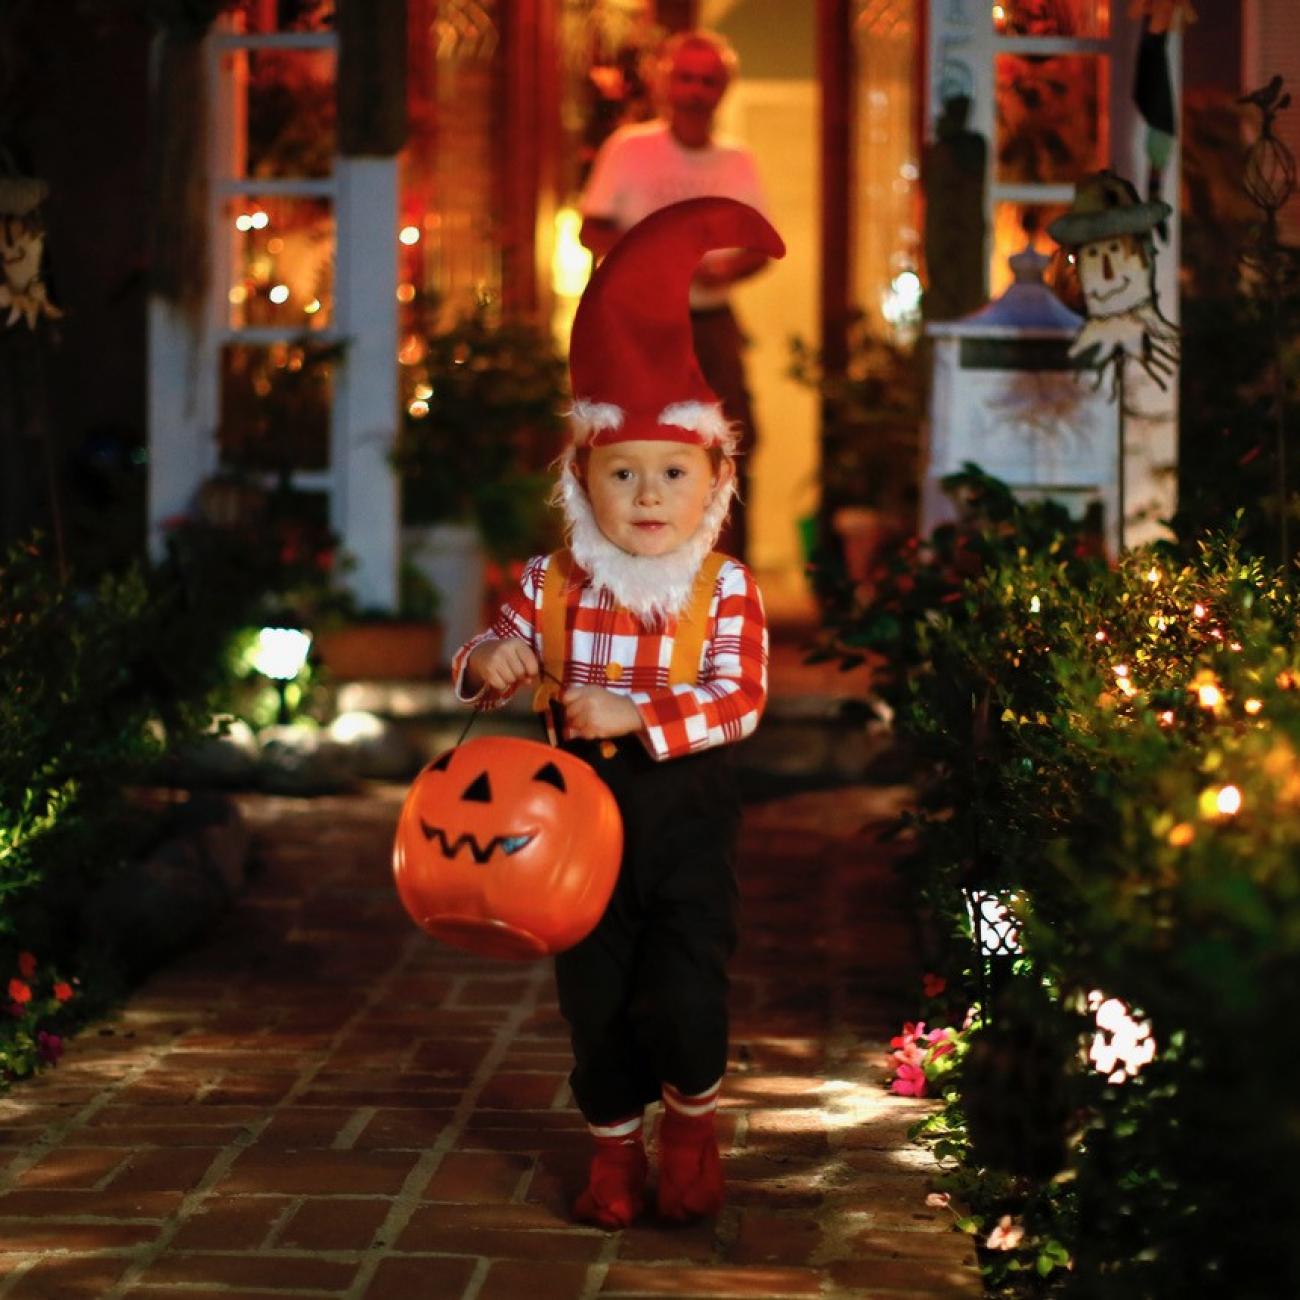 A boy collects candy as he goes trick-or-treating for Halloween in Santa Monica, California, October 31, 2012. (REUTERS/Lucy Nicholson)